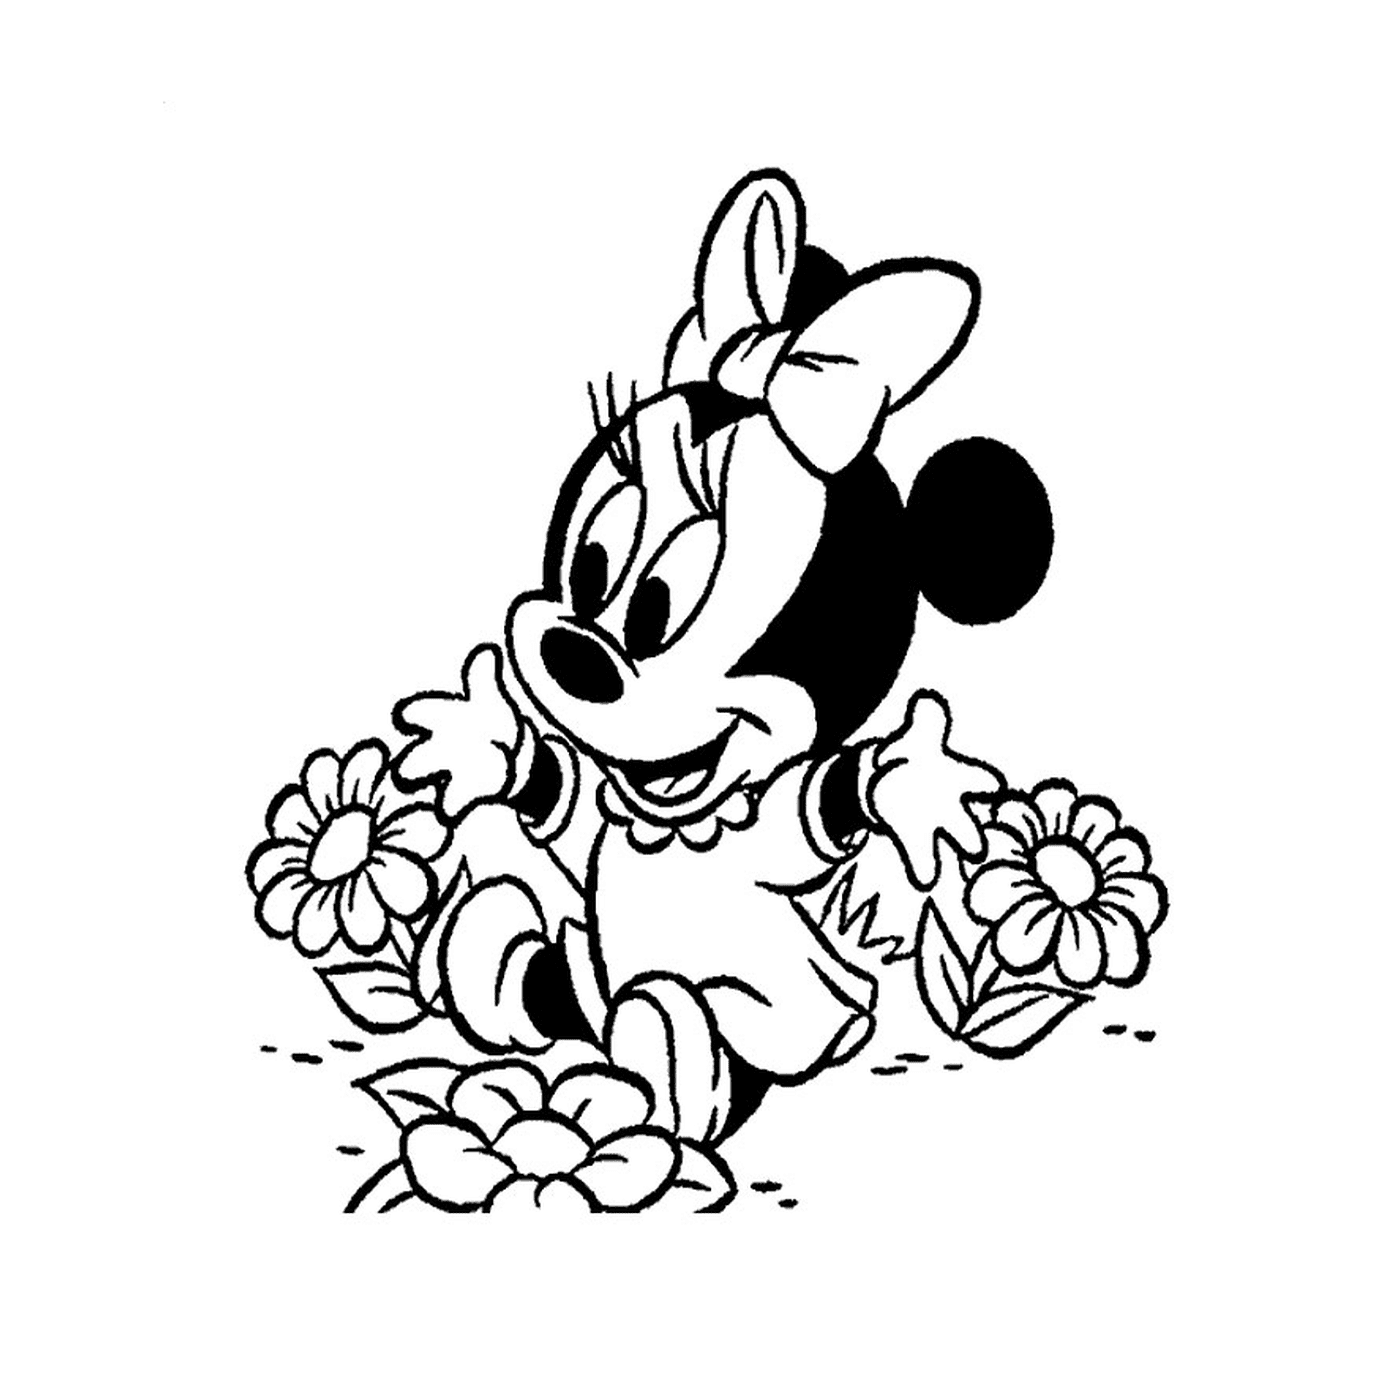  Minnie Mouse baby sitting on flowers 